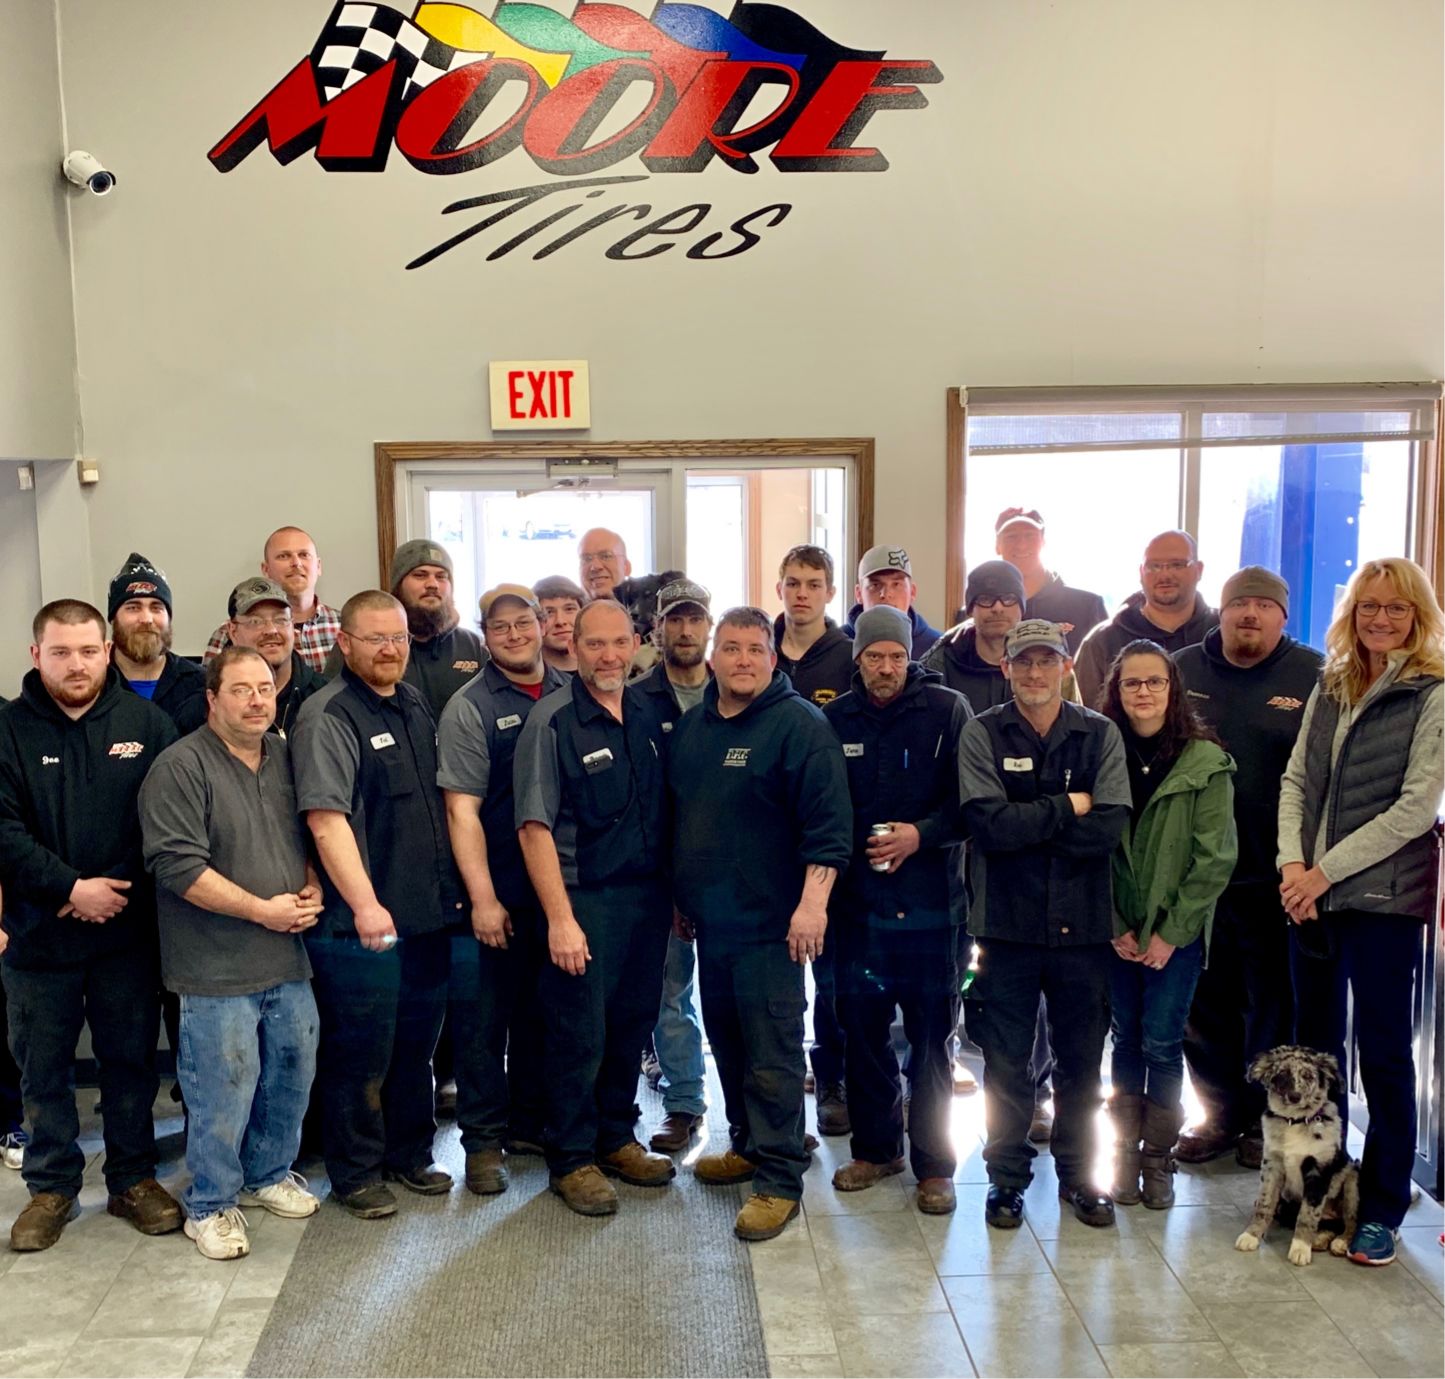 Moore Tires Group Photo